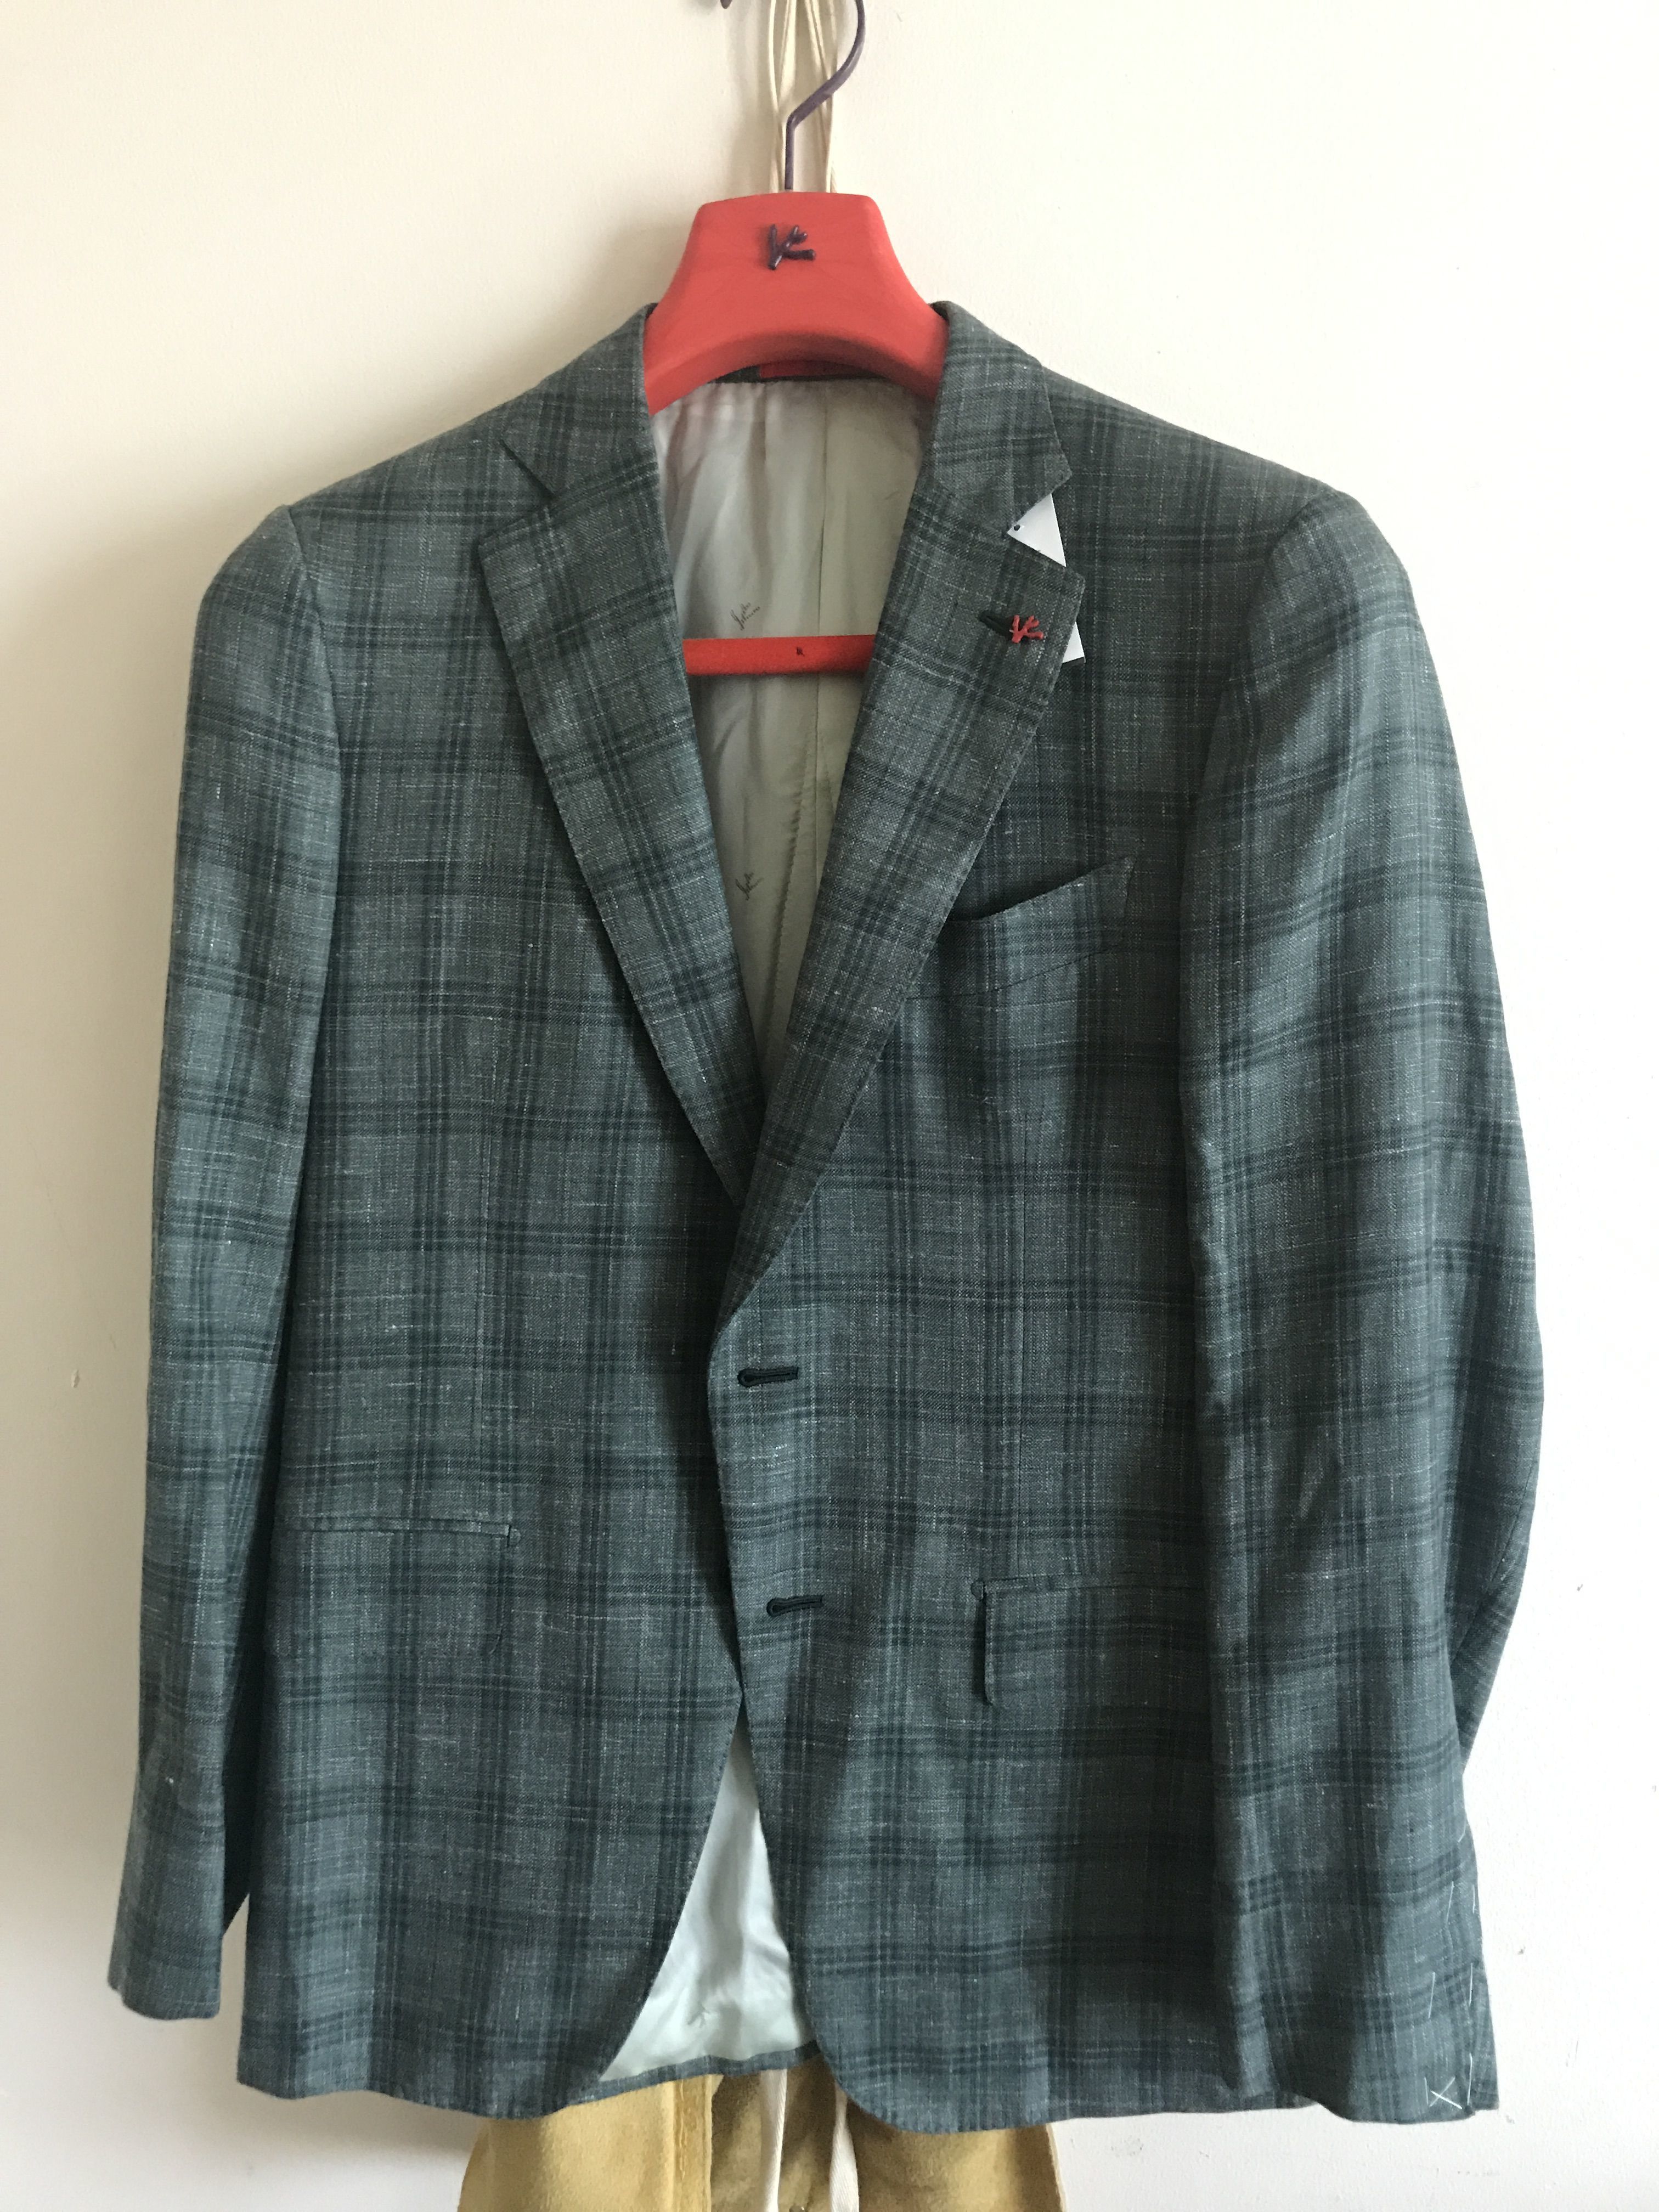 Isaia reloaded thread-suits, SC, and jackets | Styleforum